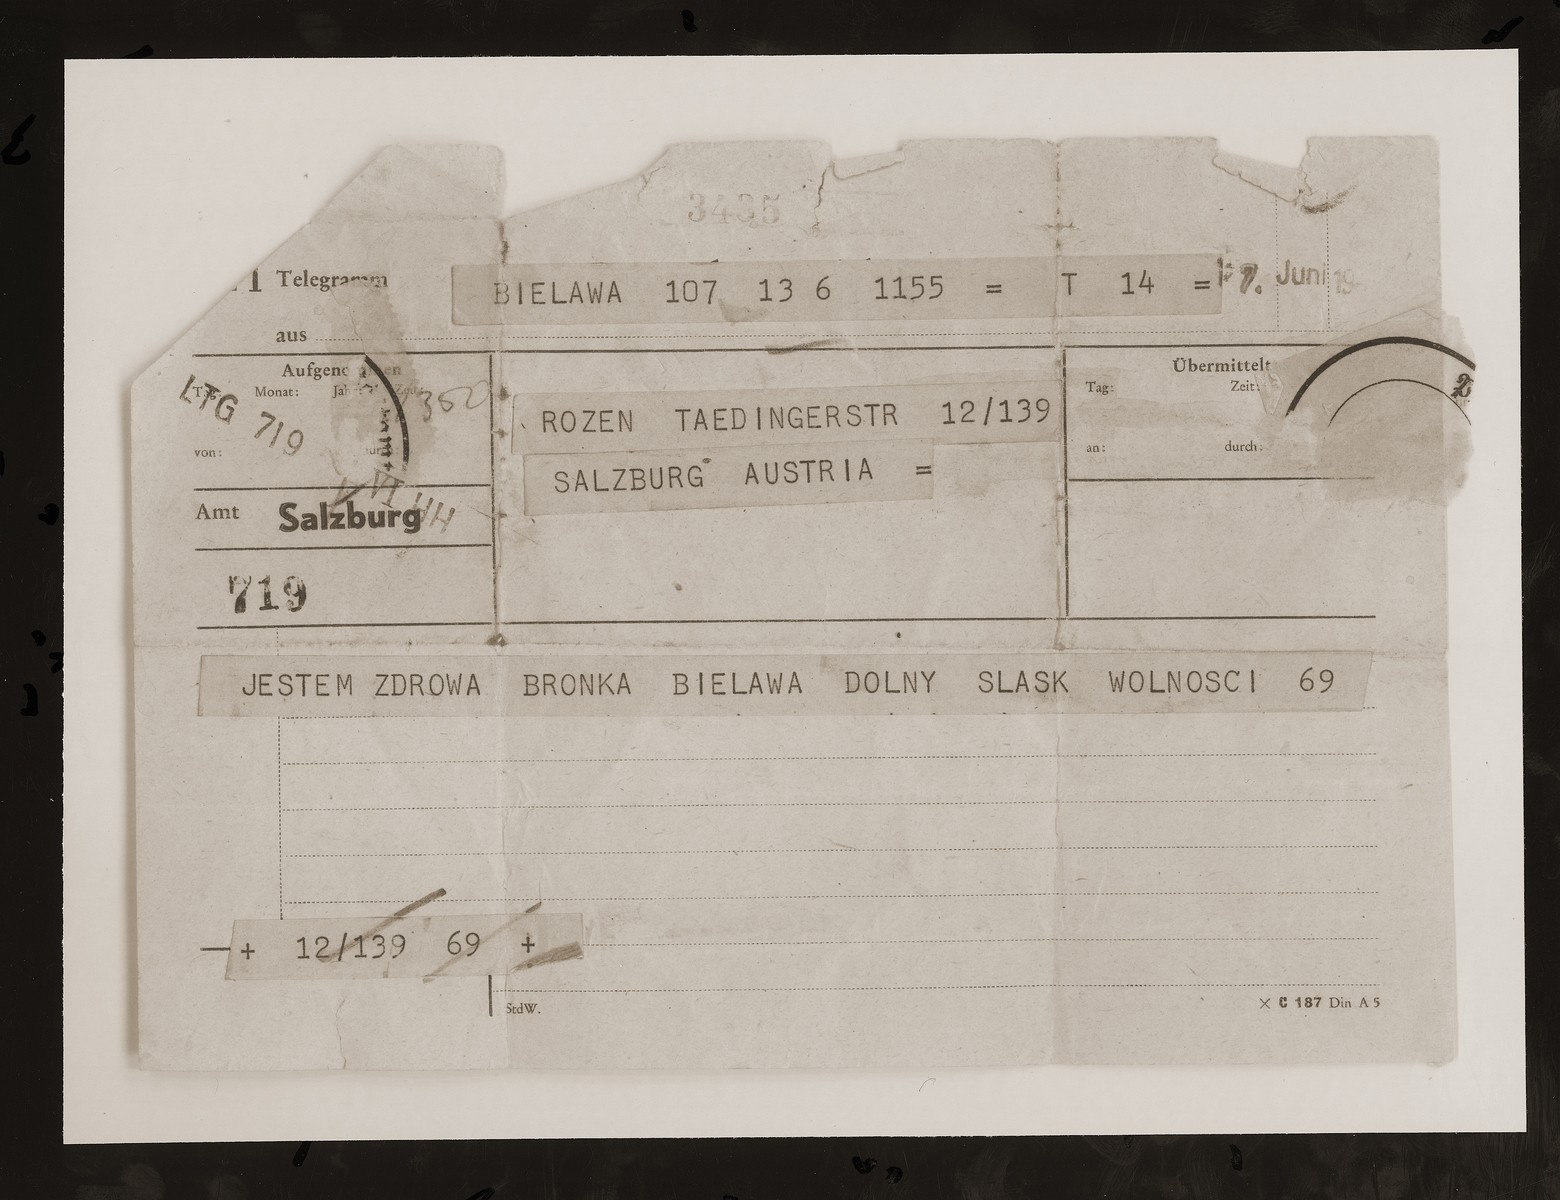 A telegram sent by Bronka (Bluma) Rozen, donor's youngest sister, to the DP camp in Salzburg, notifying him that she survived and that she is healthy.